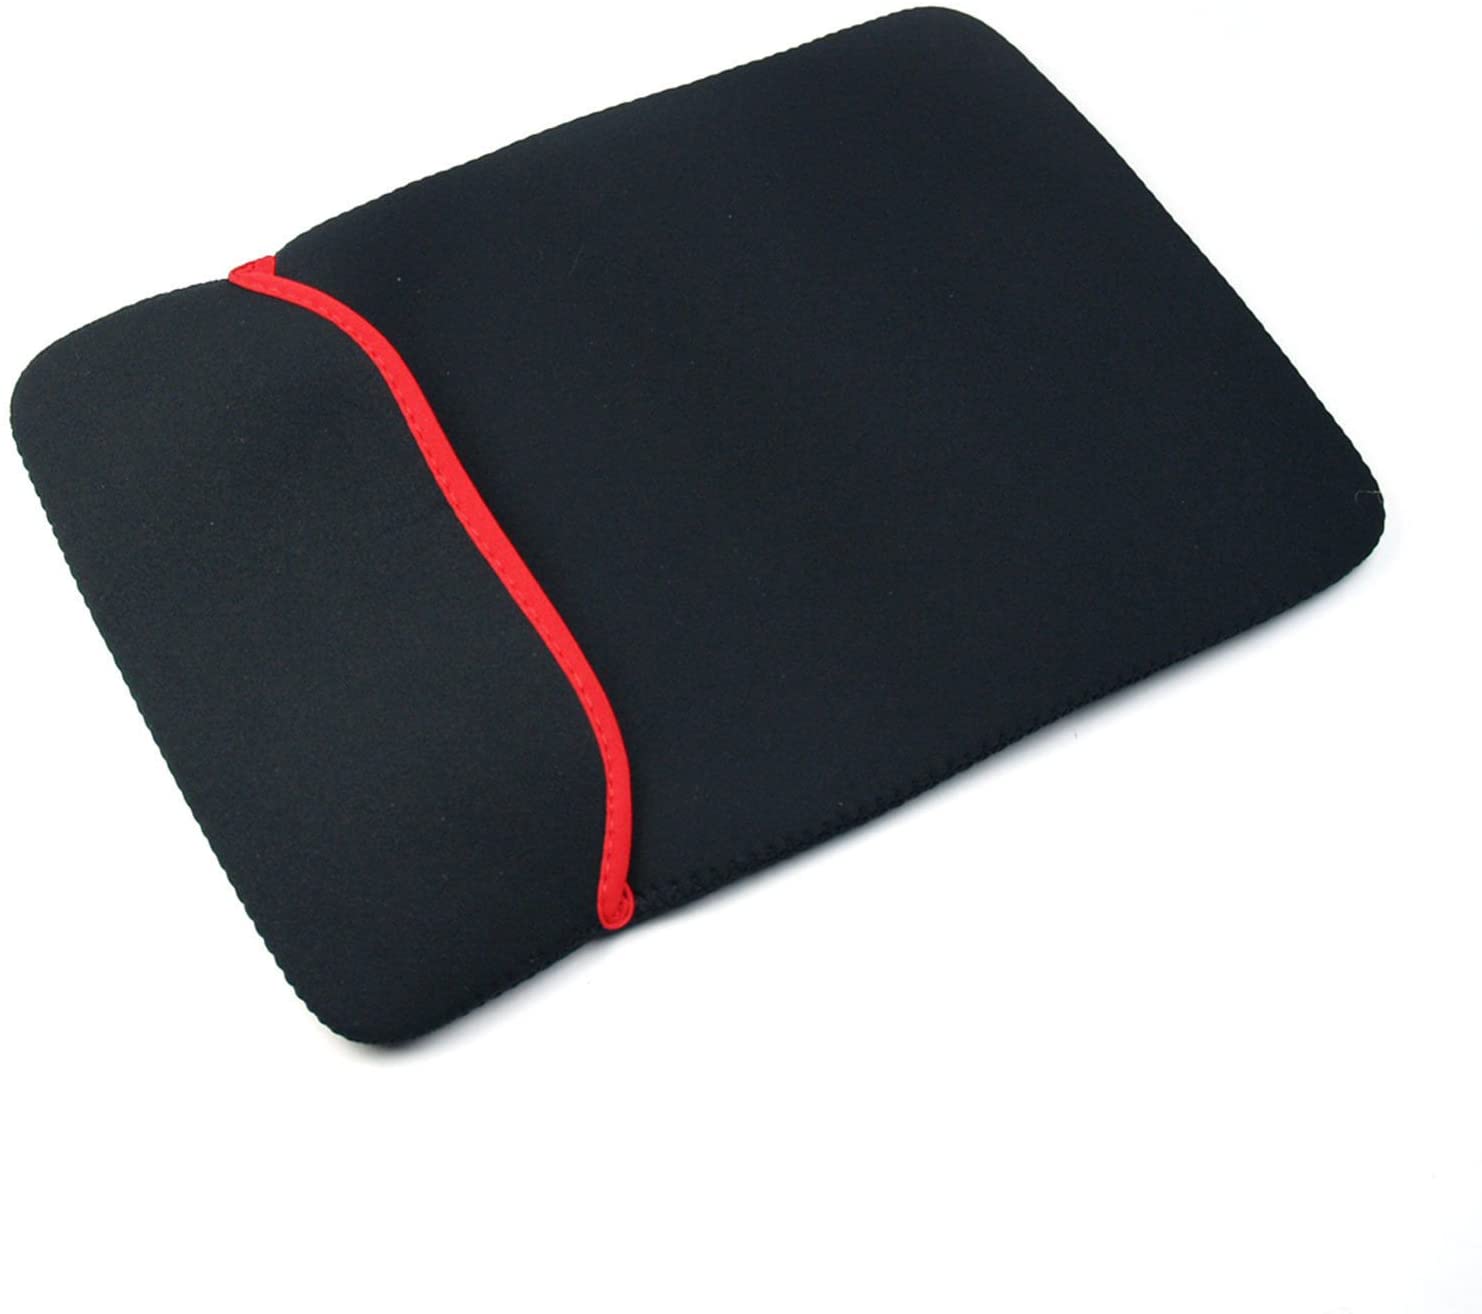 12 inch Laptop Sleeve Red Line – Black - Sleeve - 12 inch sleeve - Black sleeve - Laptop 12 inch sleeve